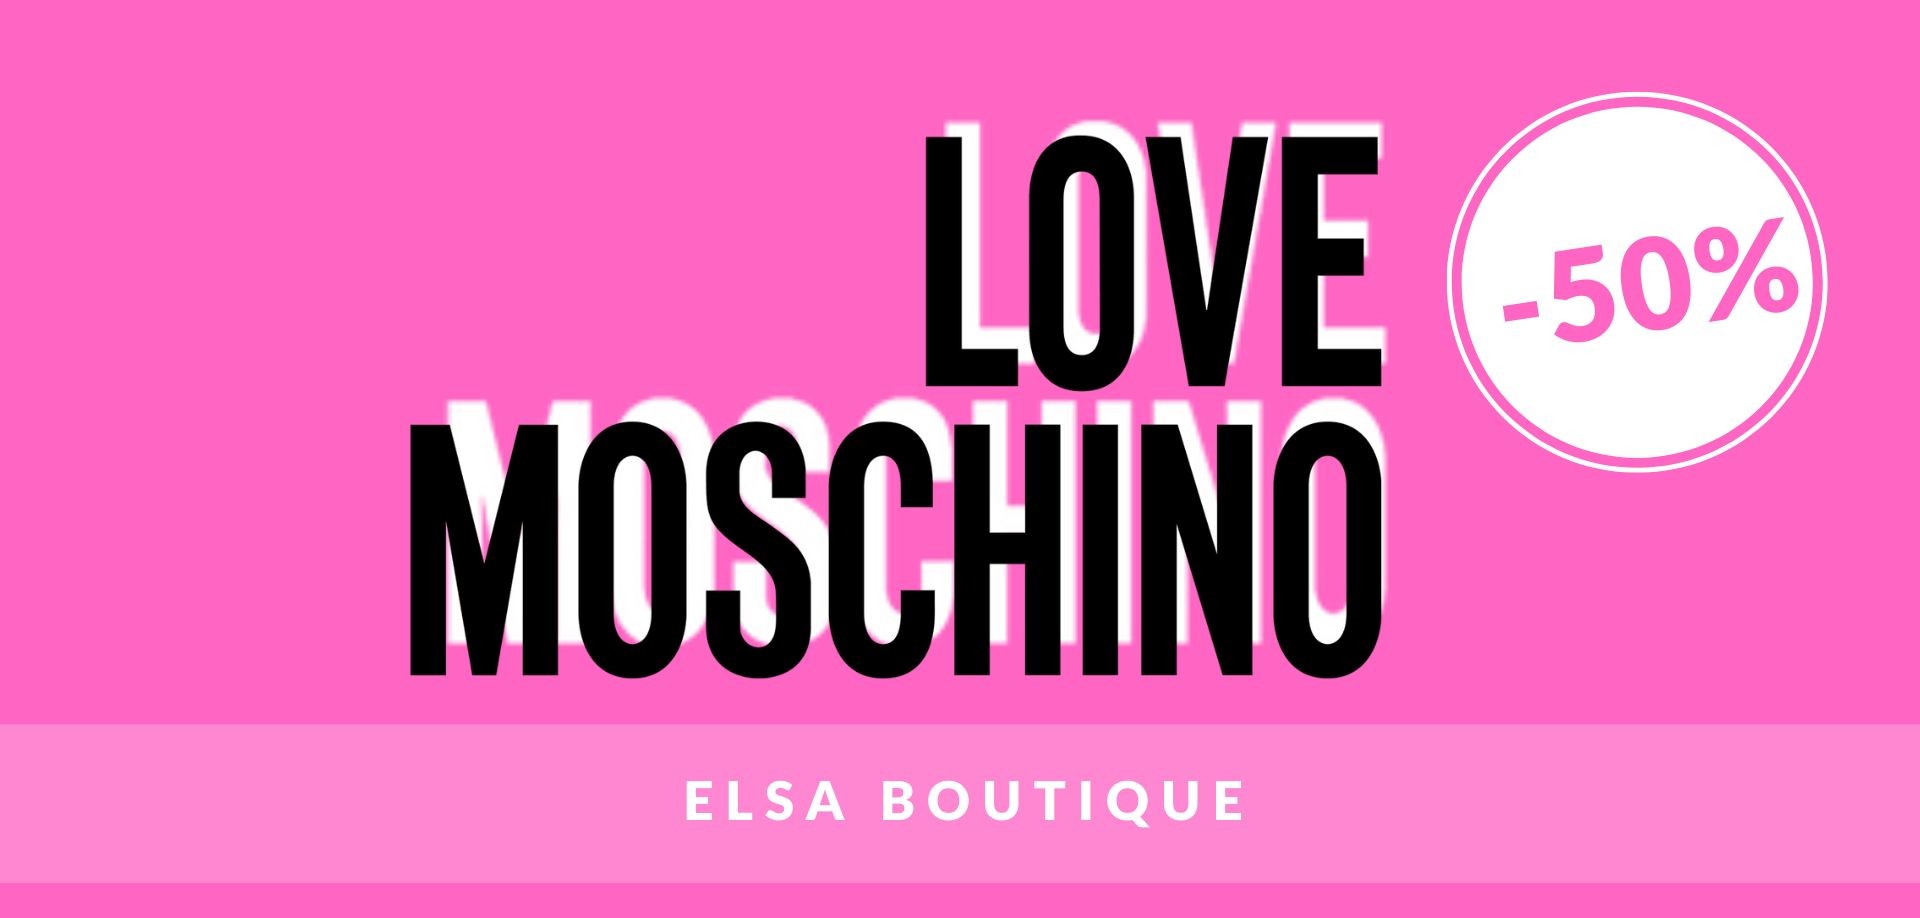 30% OFF ON LOVE MOSCHINO SPRING SUMMER 2022 COLLECTION